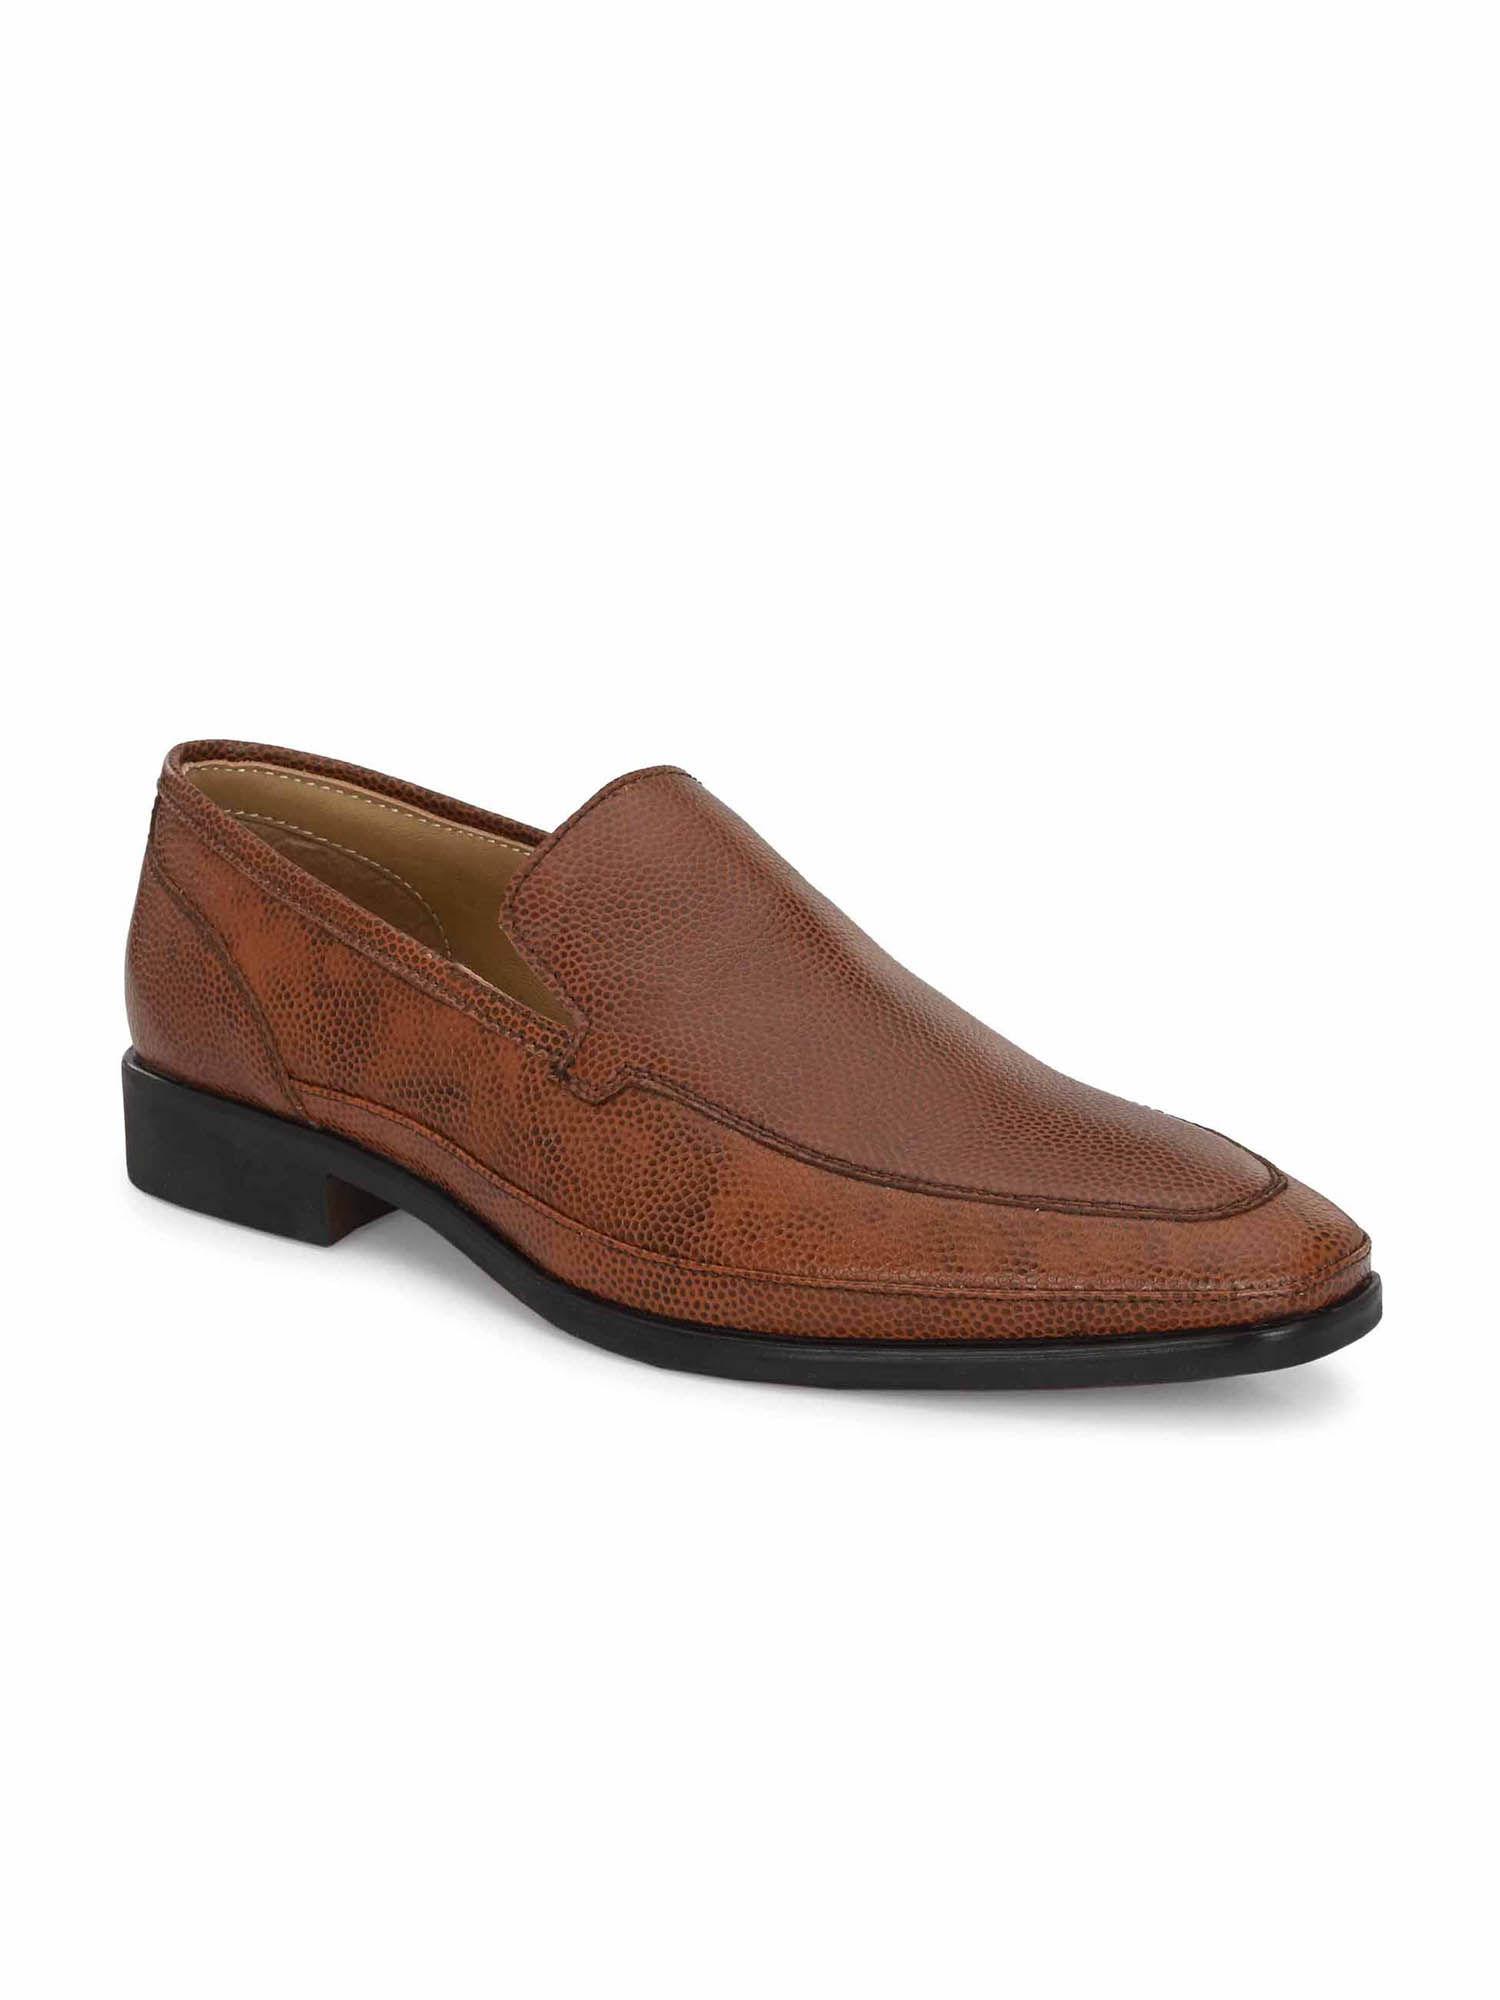 genuine-laether-tan-slip-on-formal-shoes